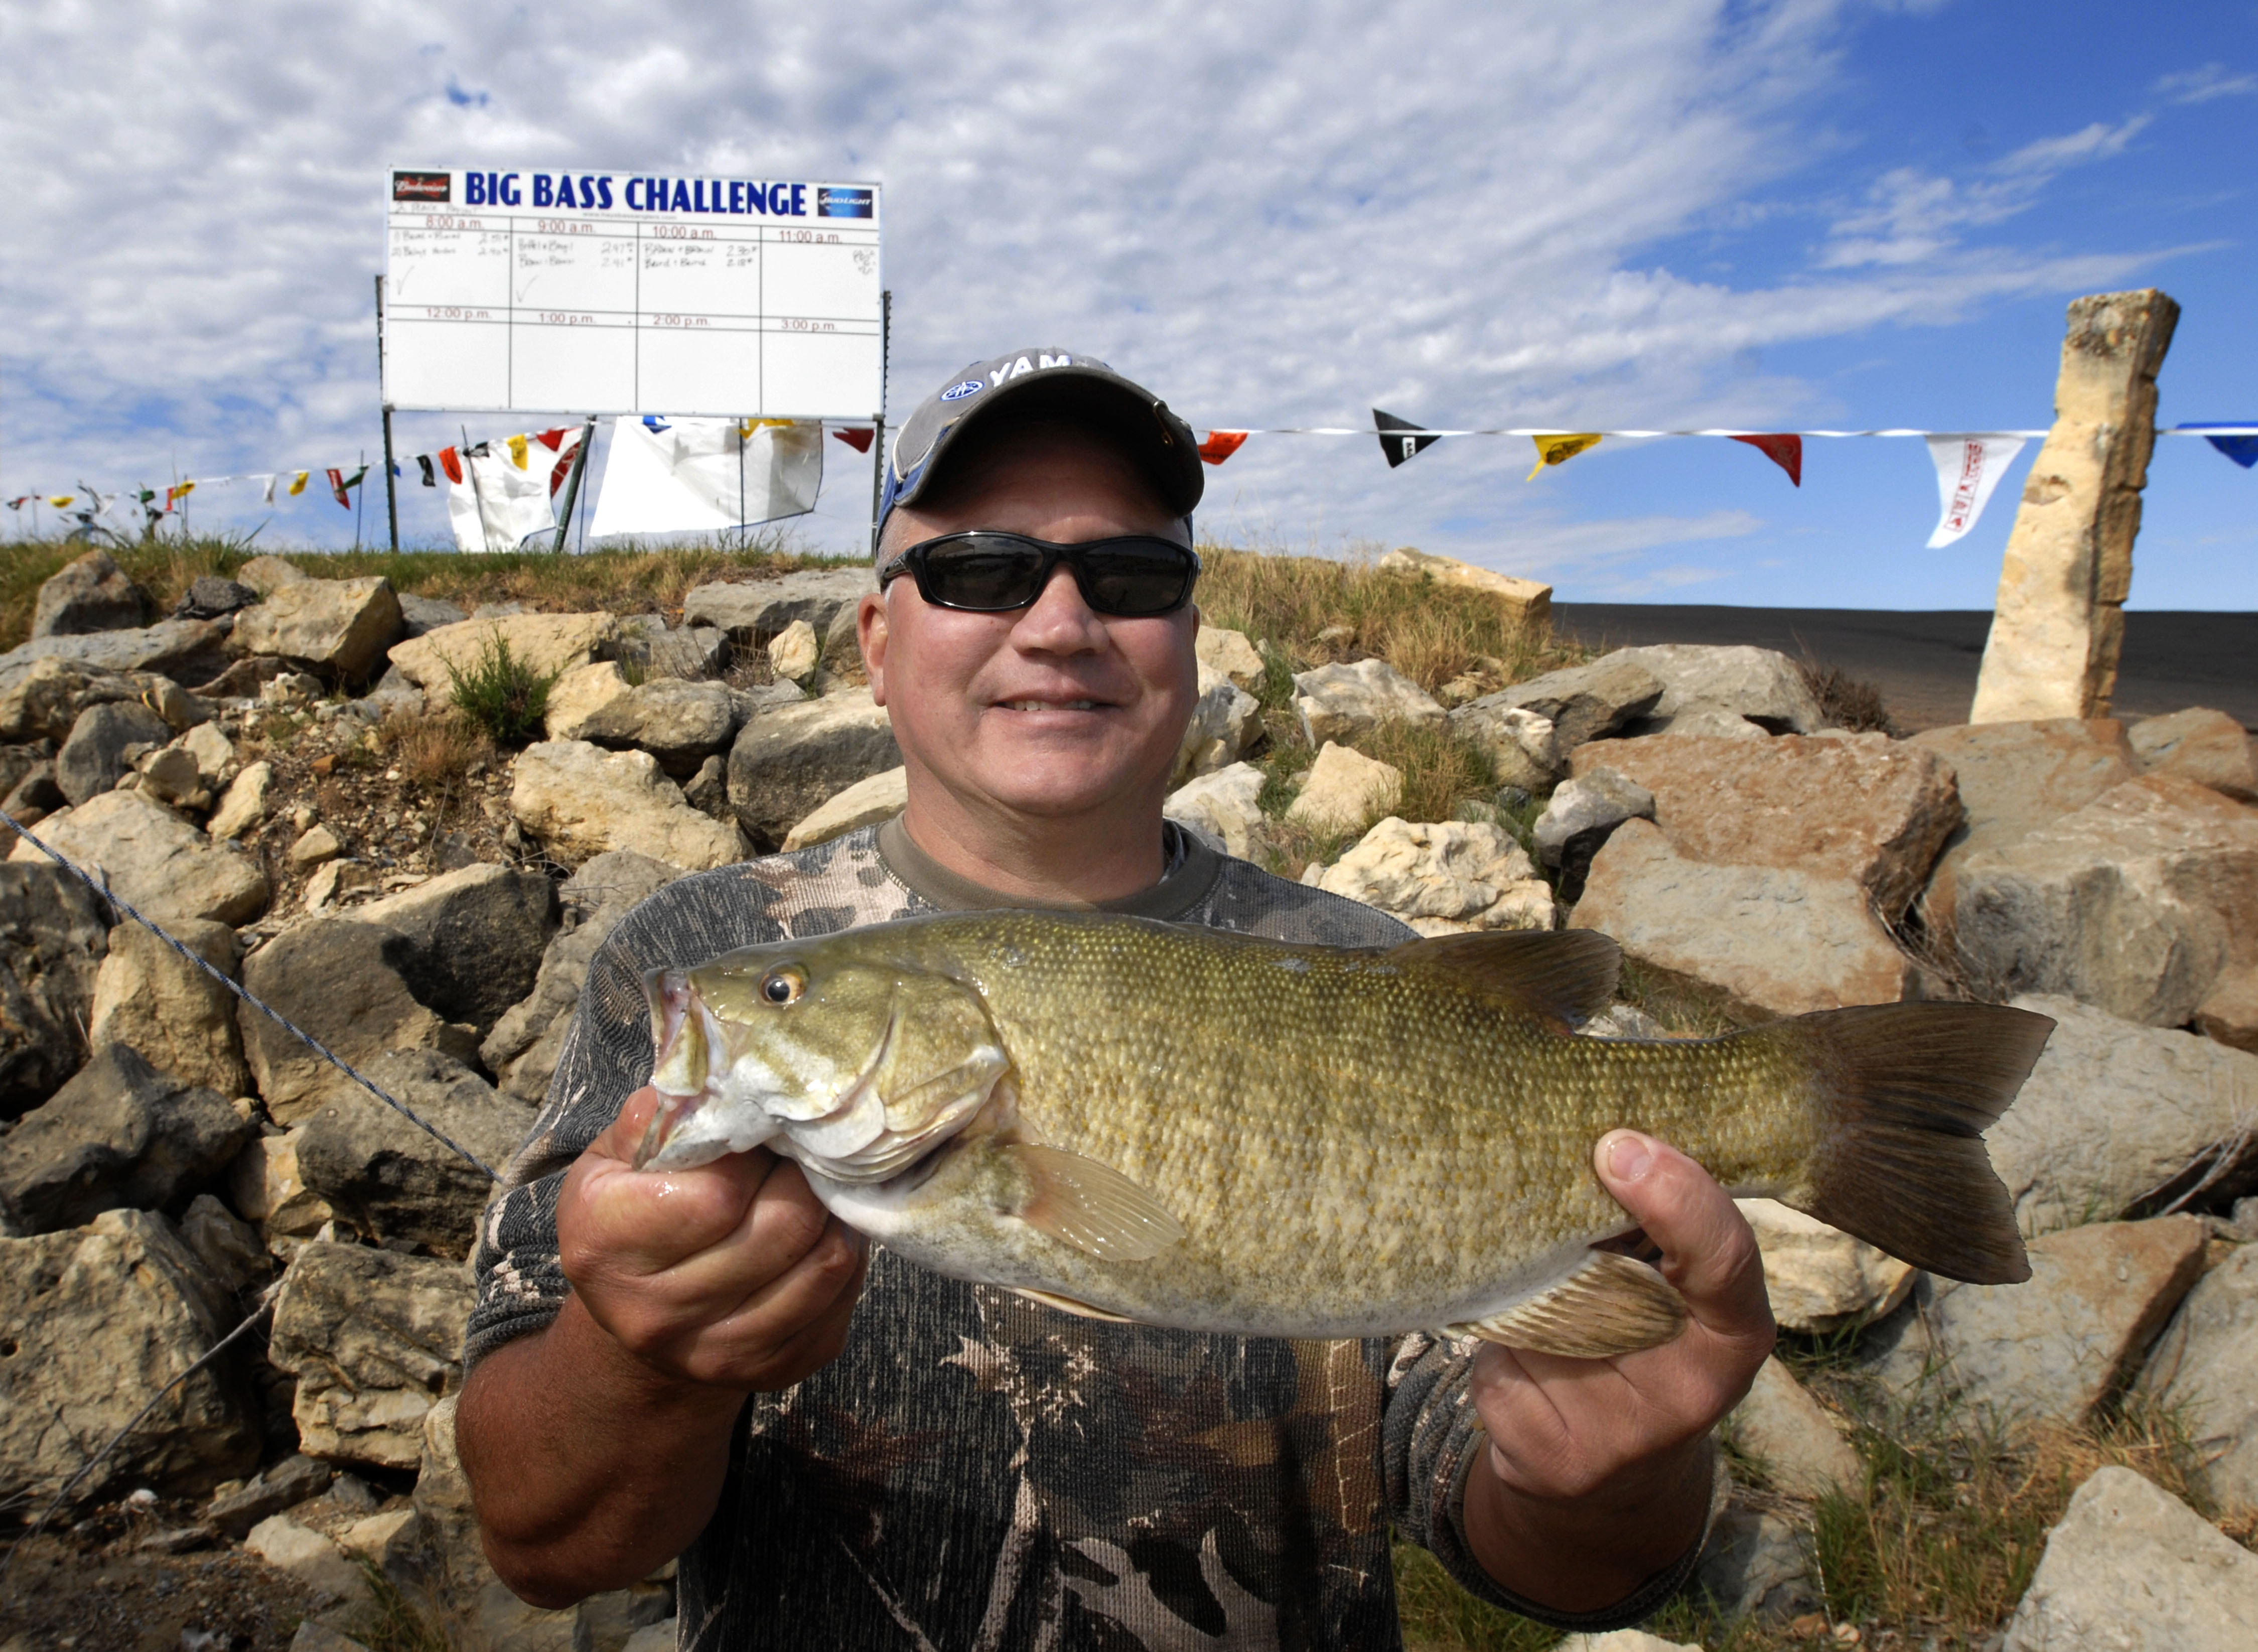 Terry Knueppel of Coweta, Okla., is pictured with his smallmouth bass weighing 2.89 pounds that claimed the top honors at the Hays Bass Anglers Association's Big Bass Challenge on Sept. 19, 2015, at Lake Wilson.